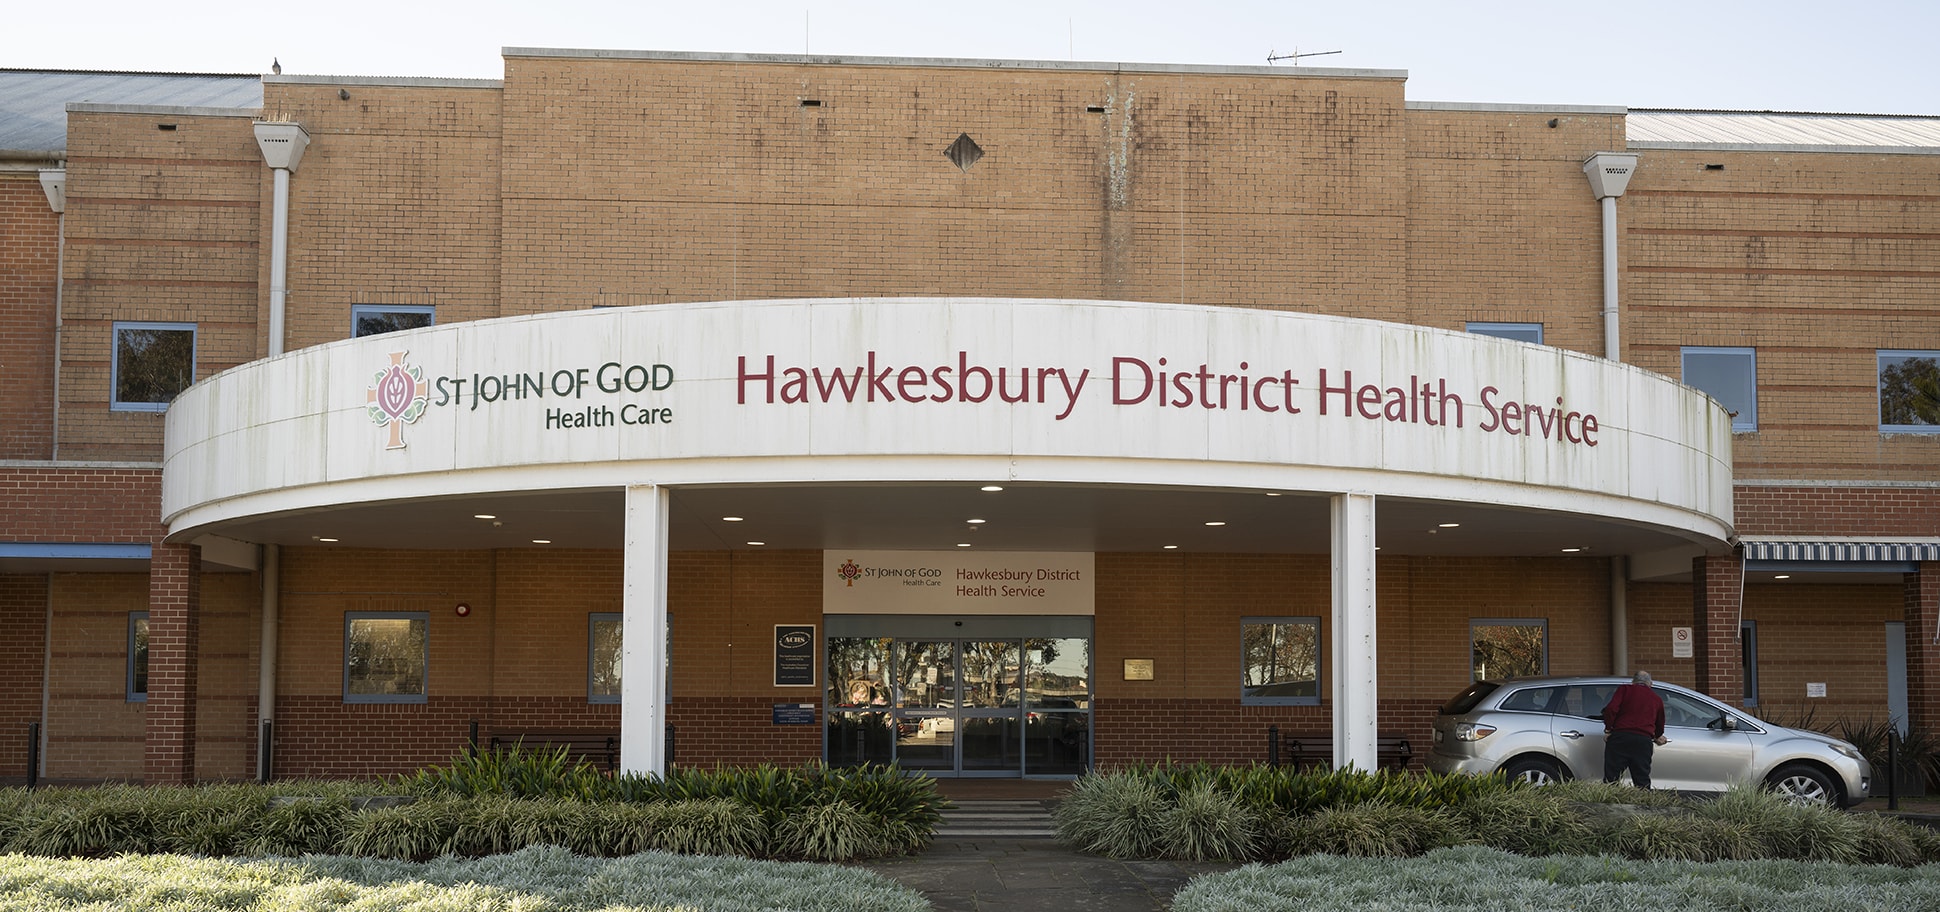 The entrance to the Hawkesbury District Health Service building from the outside.